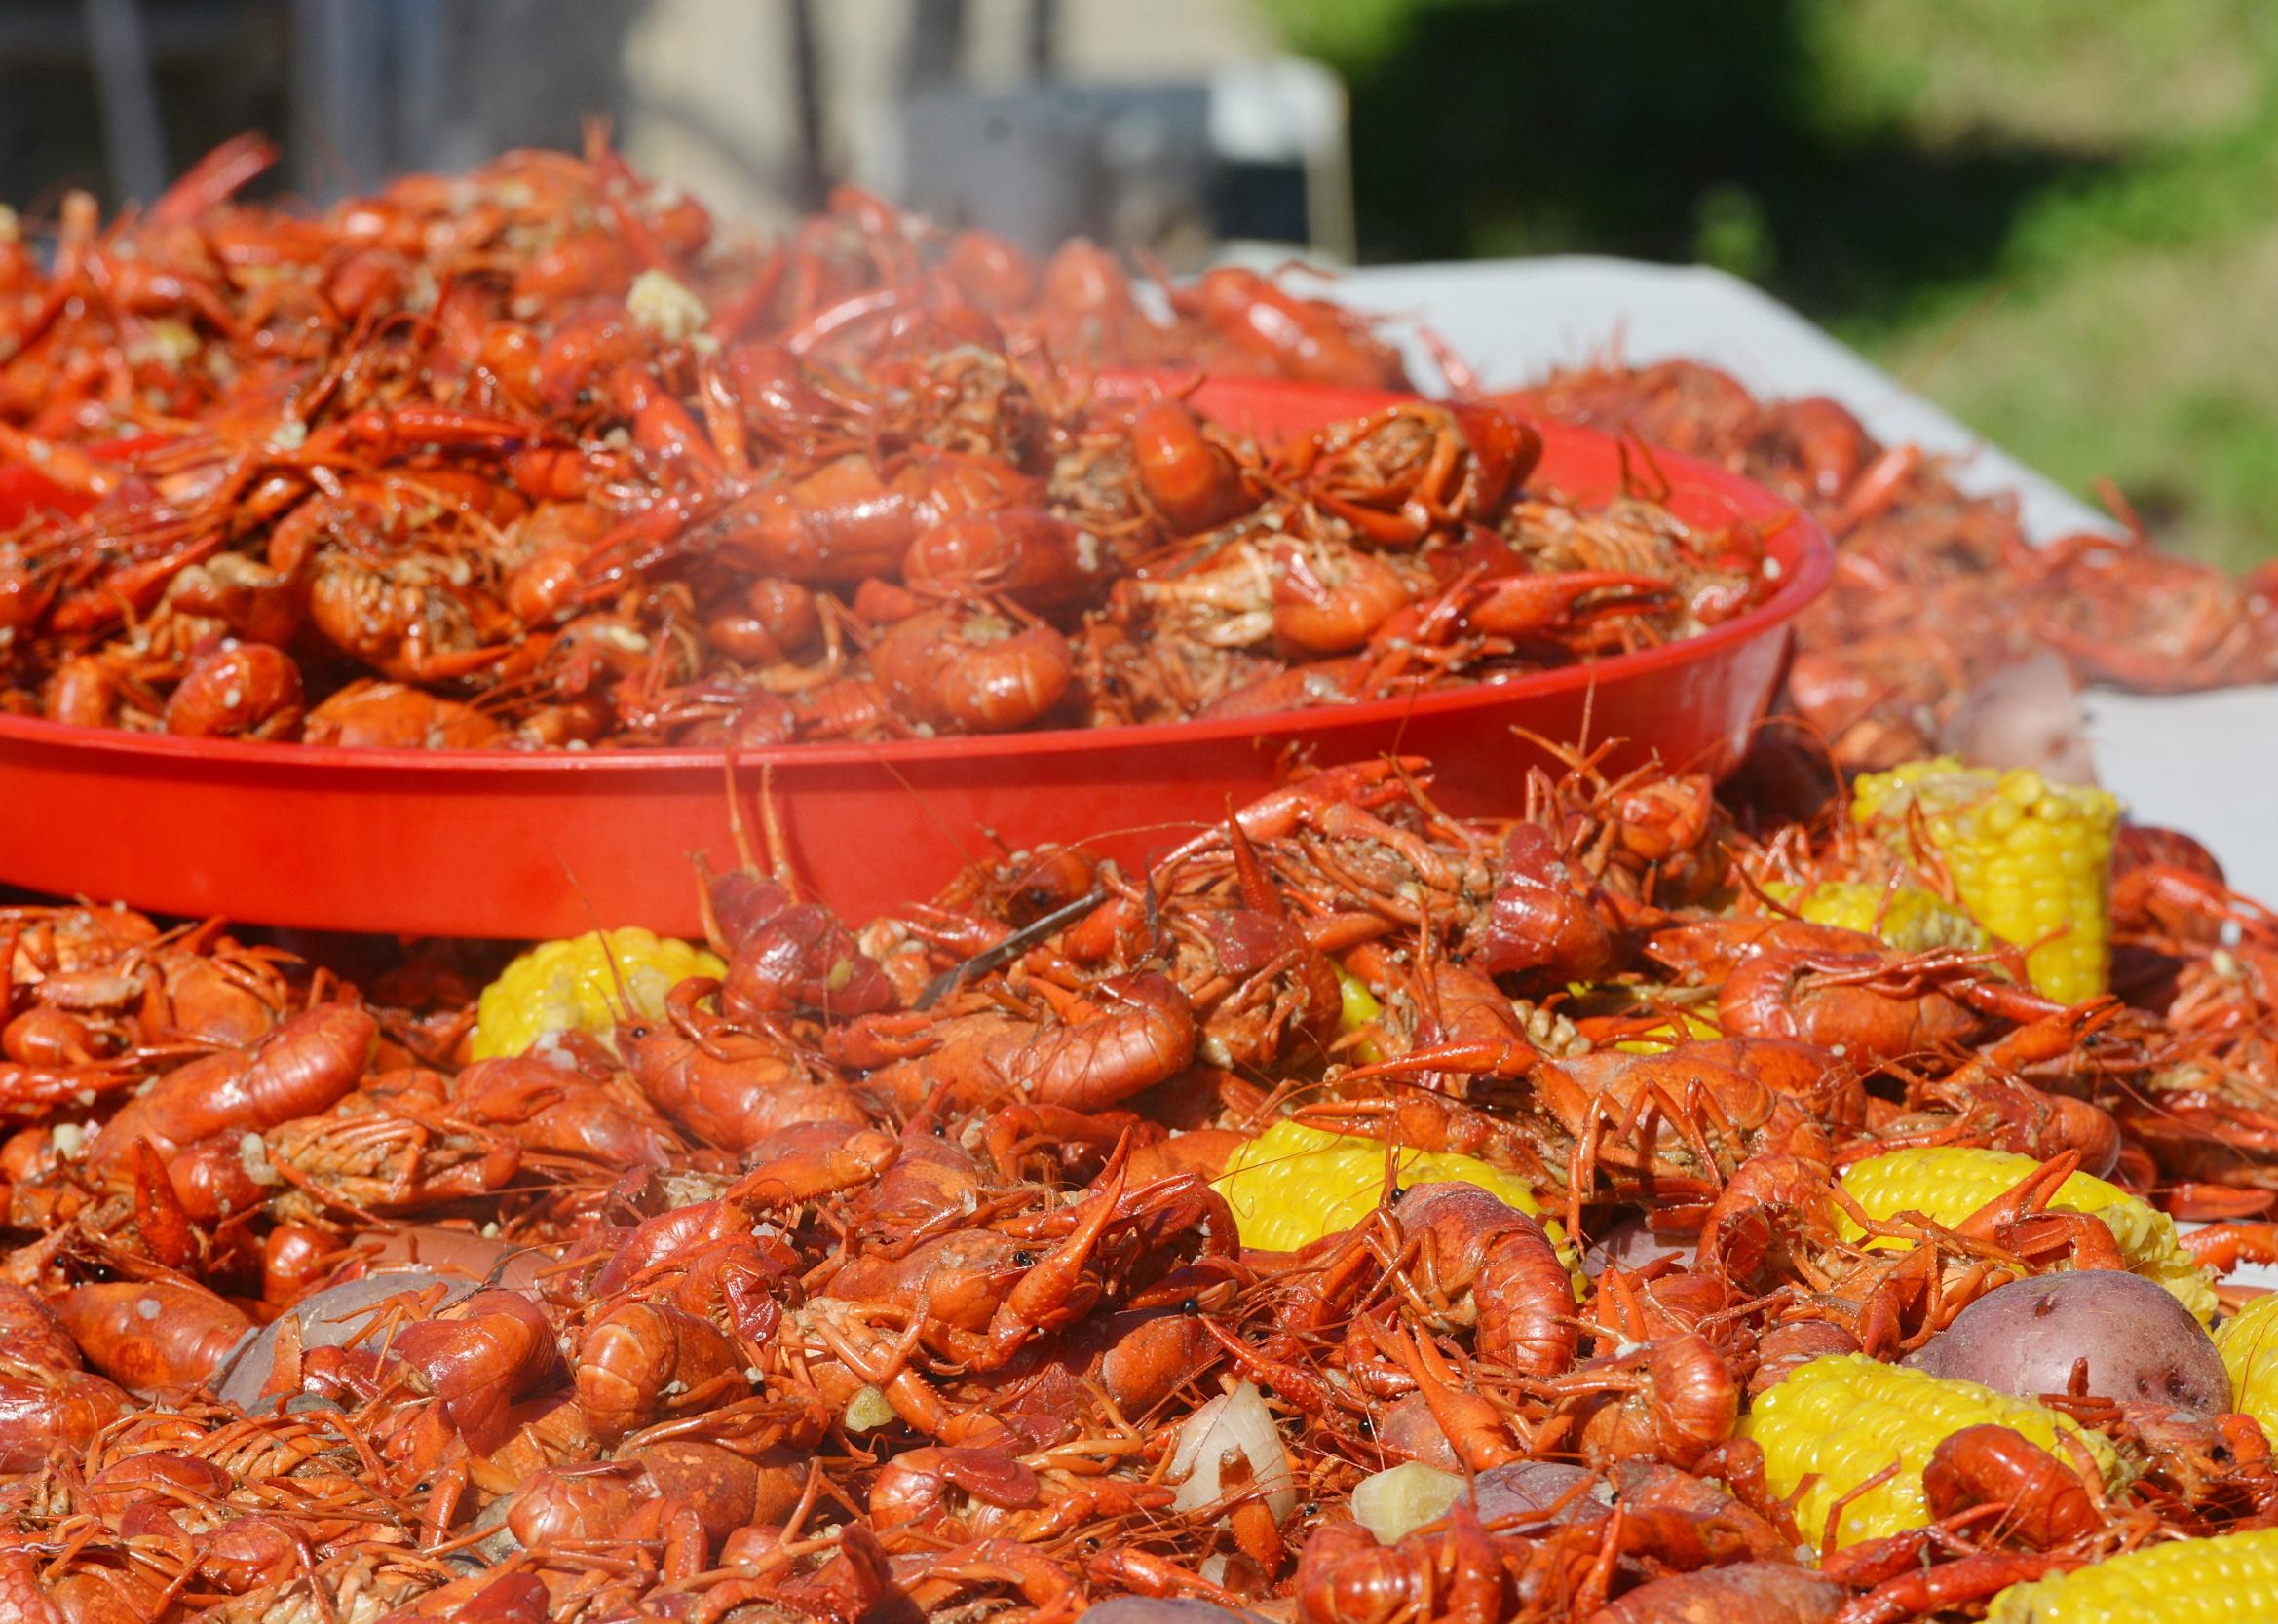 <p>To those in northern states, they're <a href="https://www.insider.com/words-that-are-different-across-the-us#miniature-lobsters-found-in-lakes-and-streams-are-called-crawfish-crayfish-or-crawdads-16">crayfish</a>; to those in the South and on the East Coast, they're crawfish; and finally, to those in the Midwest, California, and Oregon, they're crawdads. The word crayfish <a href="https://www.cjr.org/language_corner/crawfish-crayfish-crawdad.php">evolved</a> from the Middle English word "crevis." Crawdads are also called "crawdaddies" or "crawdabs" in some areas.</p>